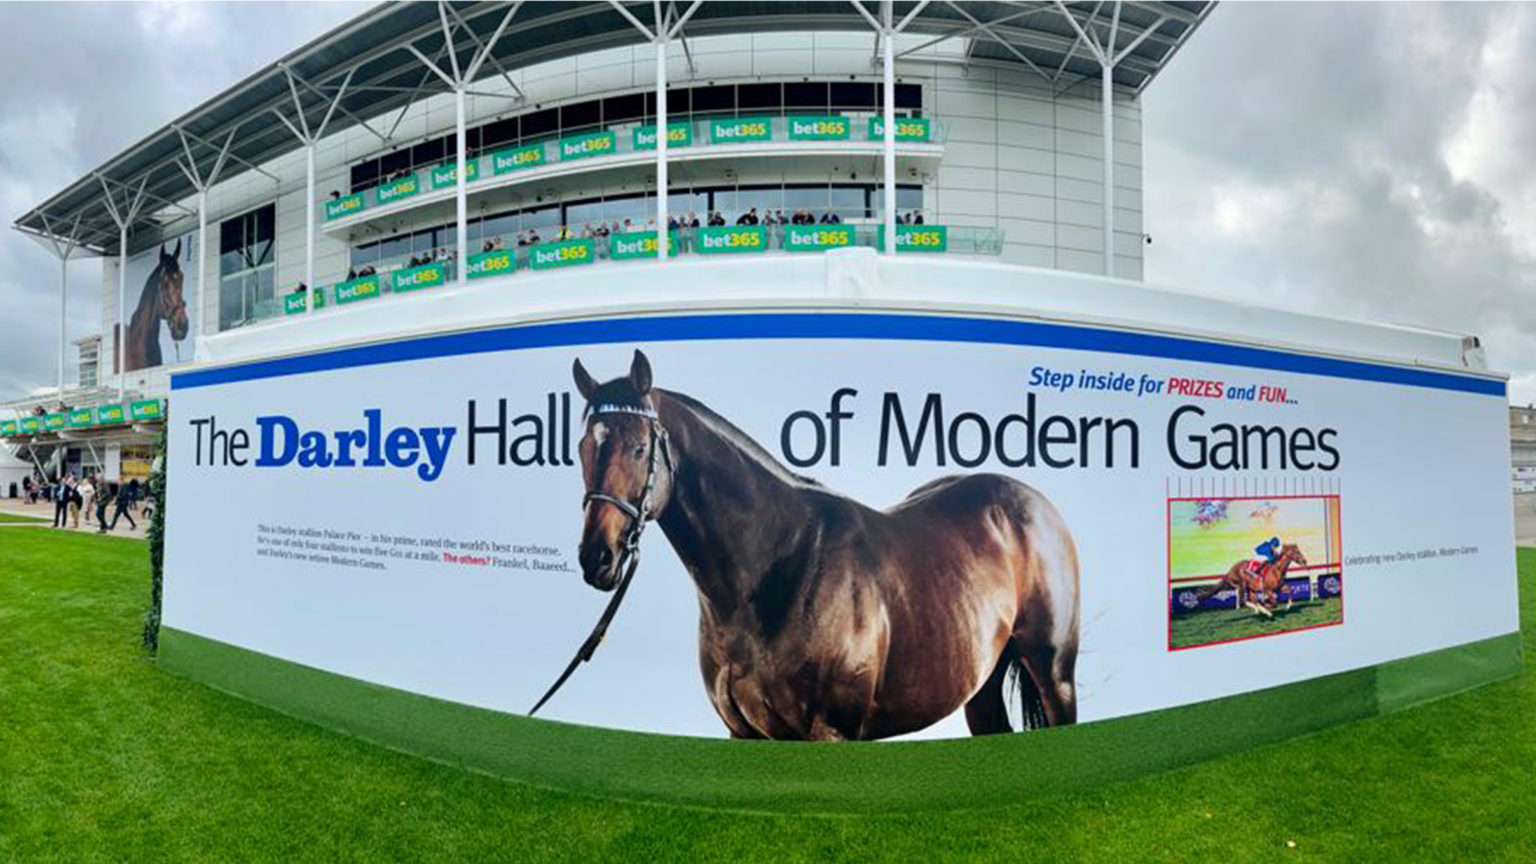 Darley hall of modern games - Newmarket races banner